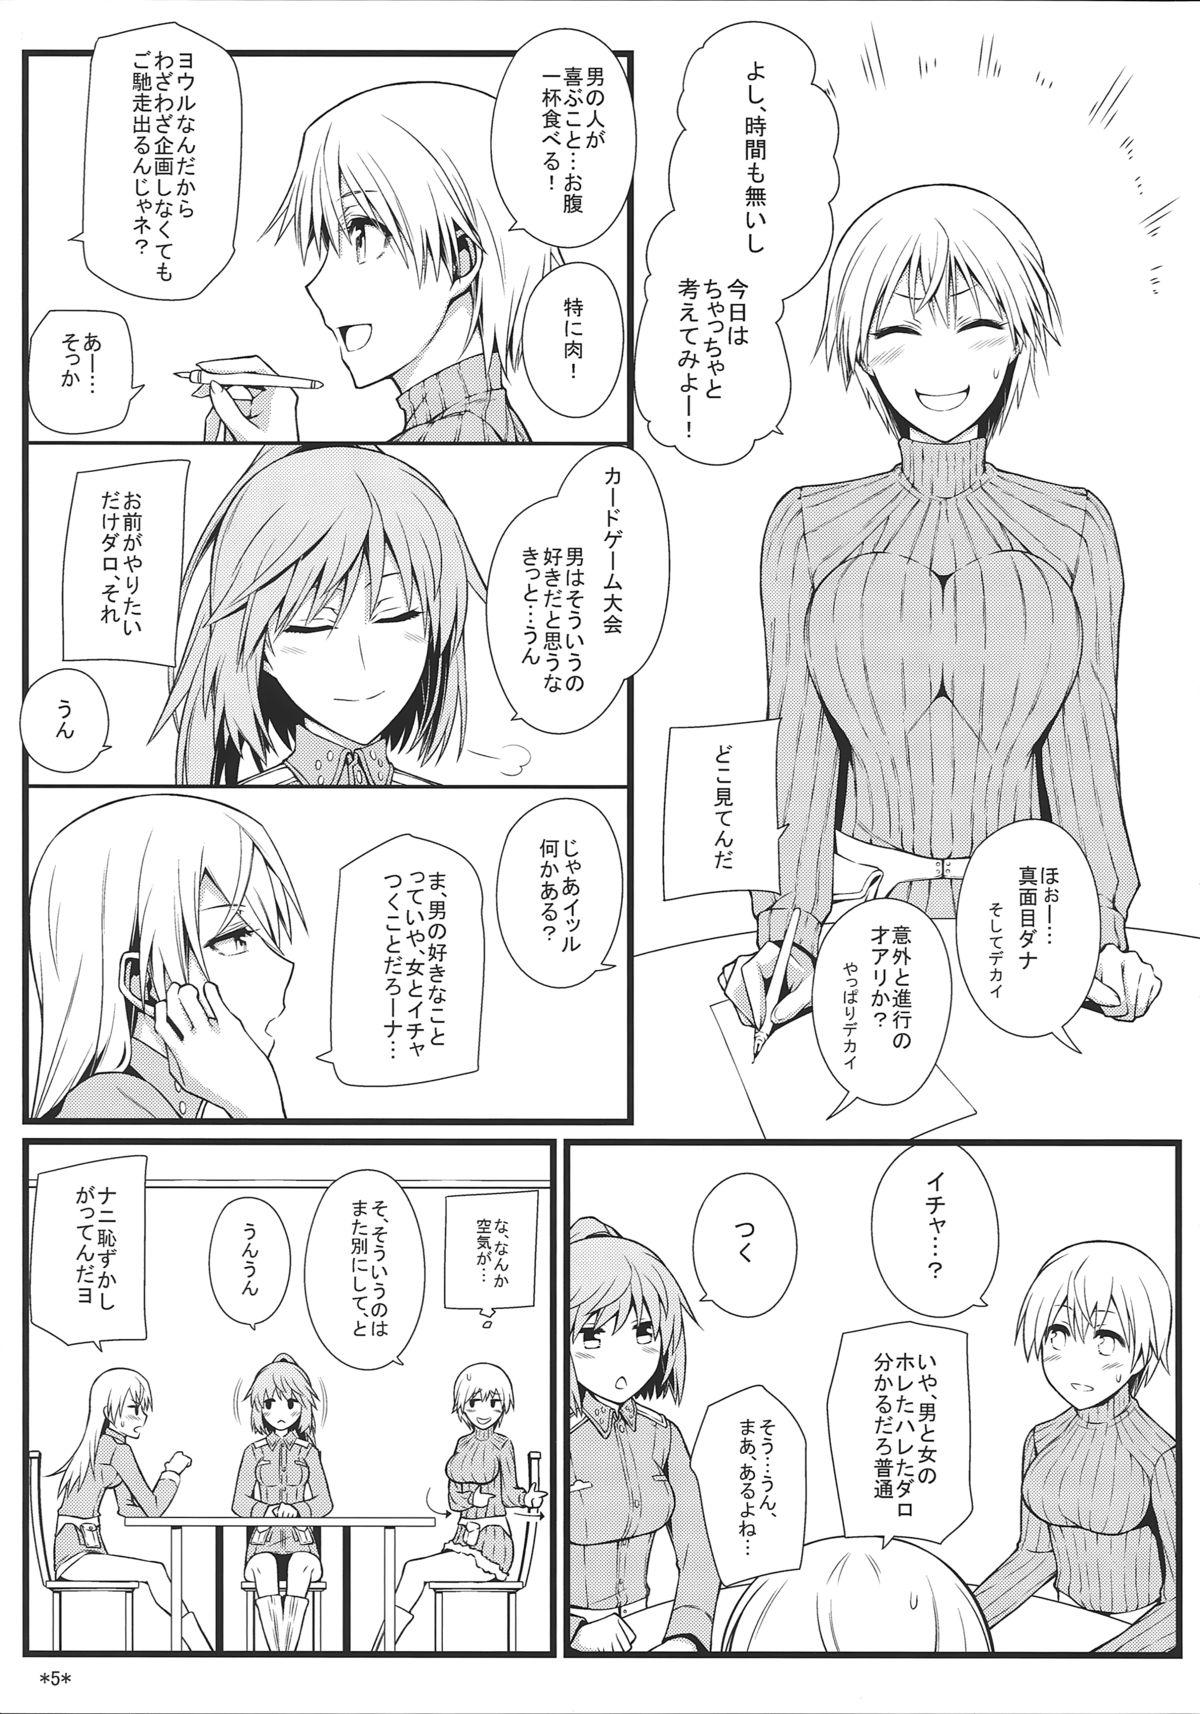 Fuck KARLSLAND SYNDROME 3 - Strike witches Chunky - Page 7